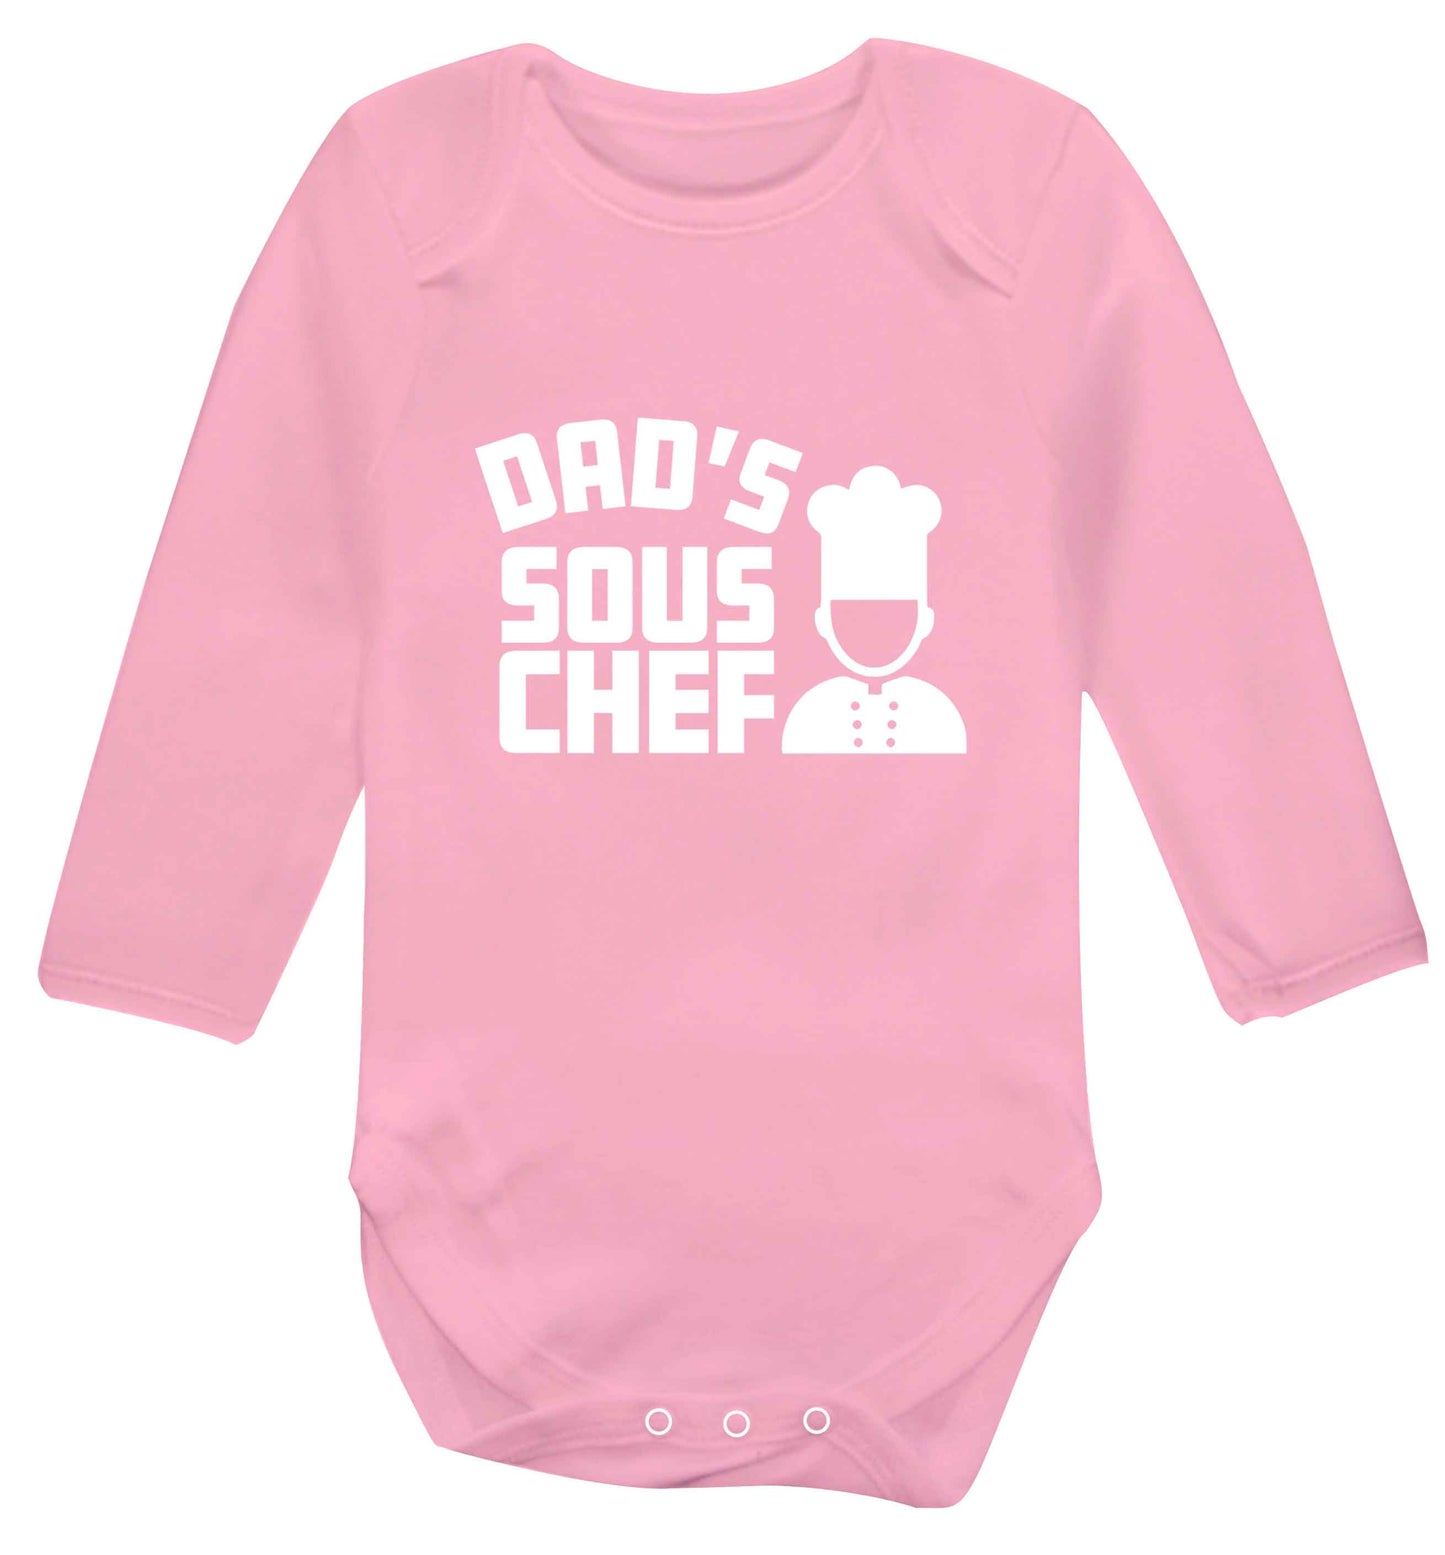 Dad's sous chef baby vest long sleeved pale pink 6-12 months